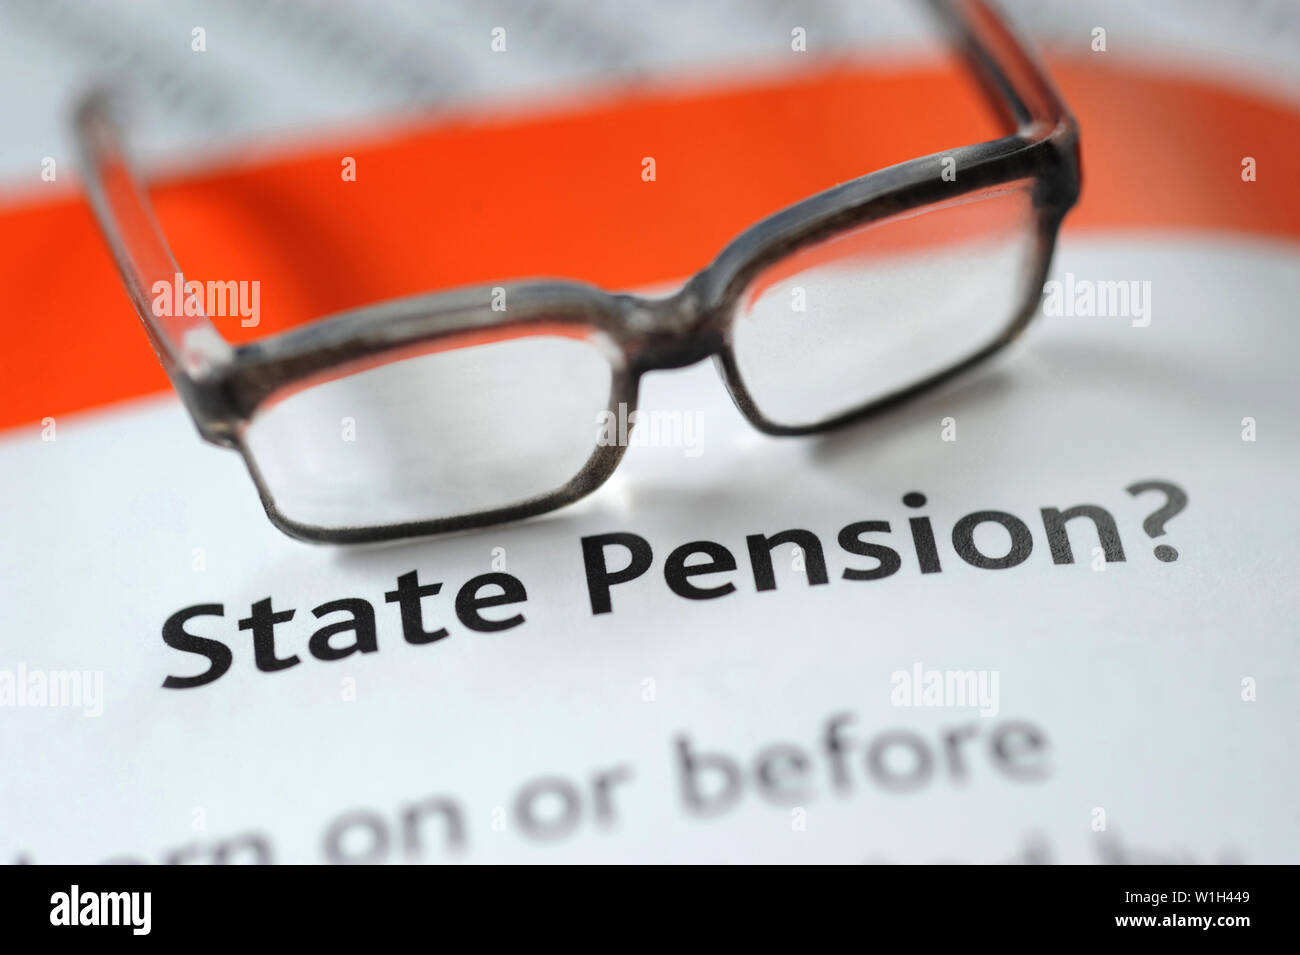 STATE PENSION LEAFLET WITH SPECTACLES RE PENSIONS OLD AGE PENSIONERS INCOME RETIREMENT ETC UK Stock Photo